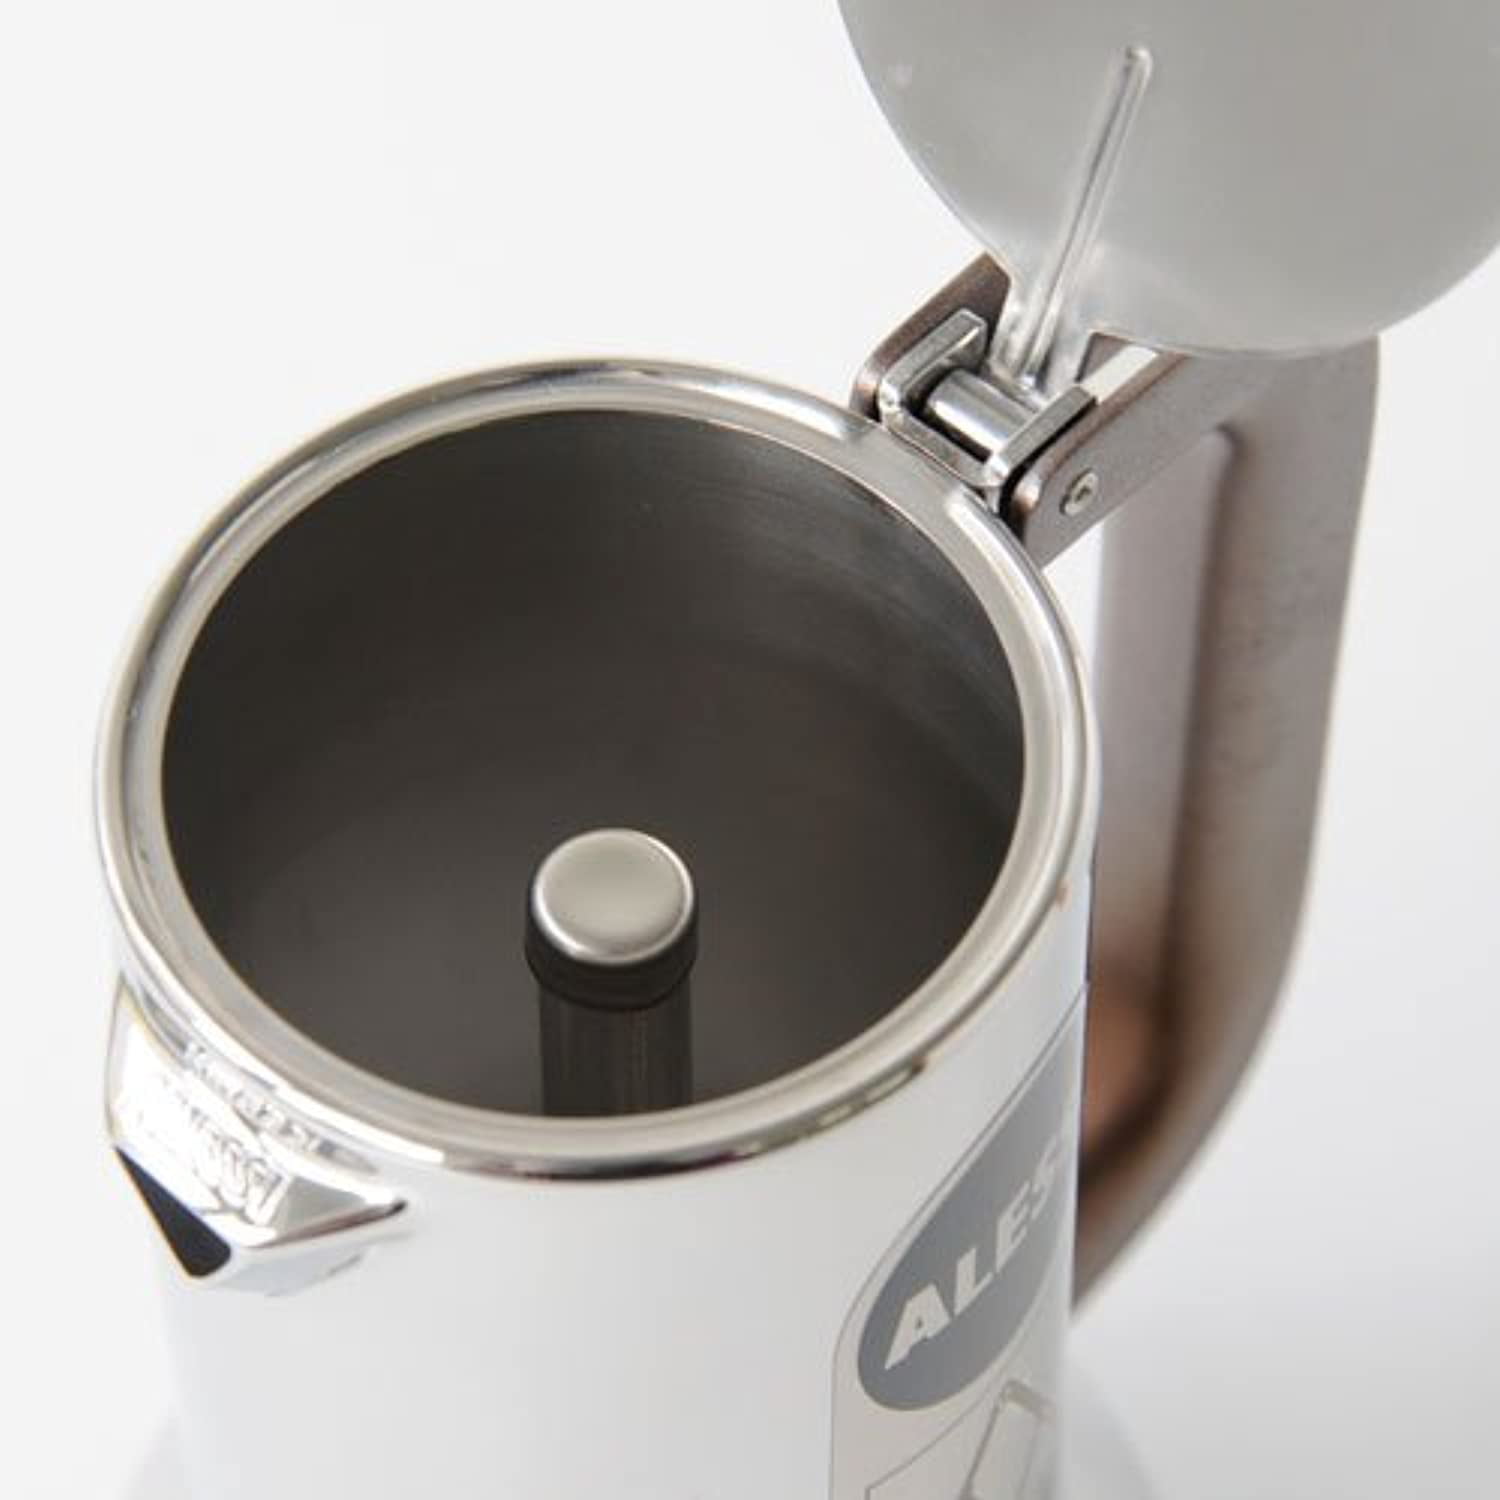 Alessi Espresso Coffee Maker in 18/10 Stainless Steel with Mirror Polished 